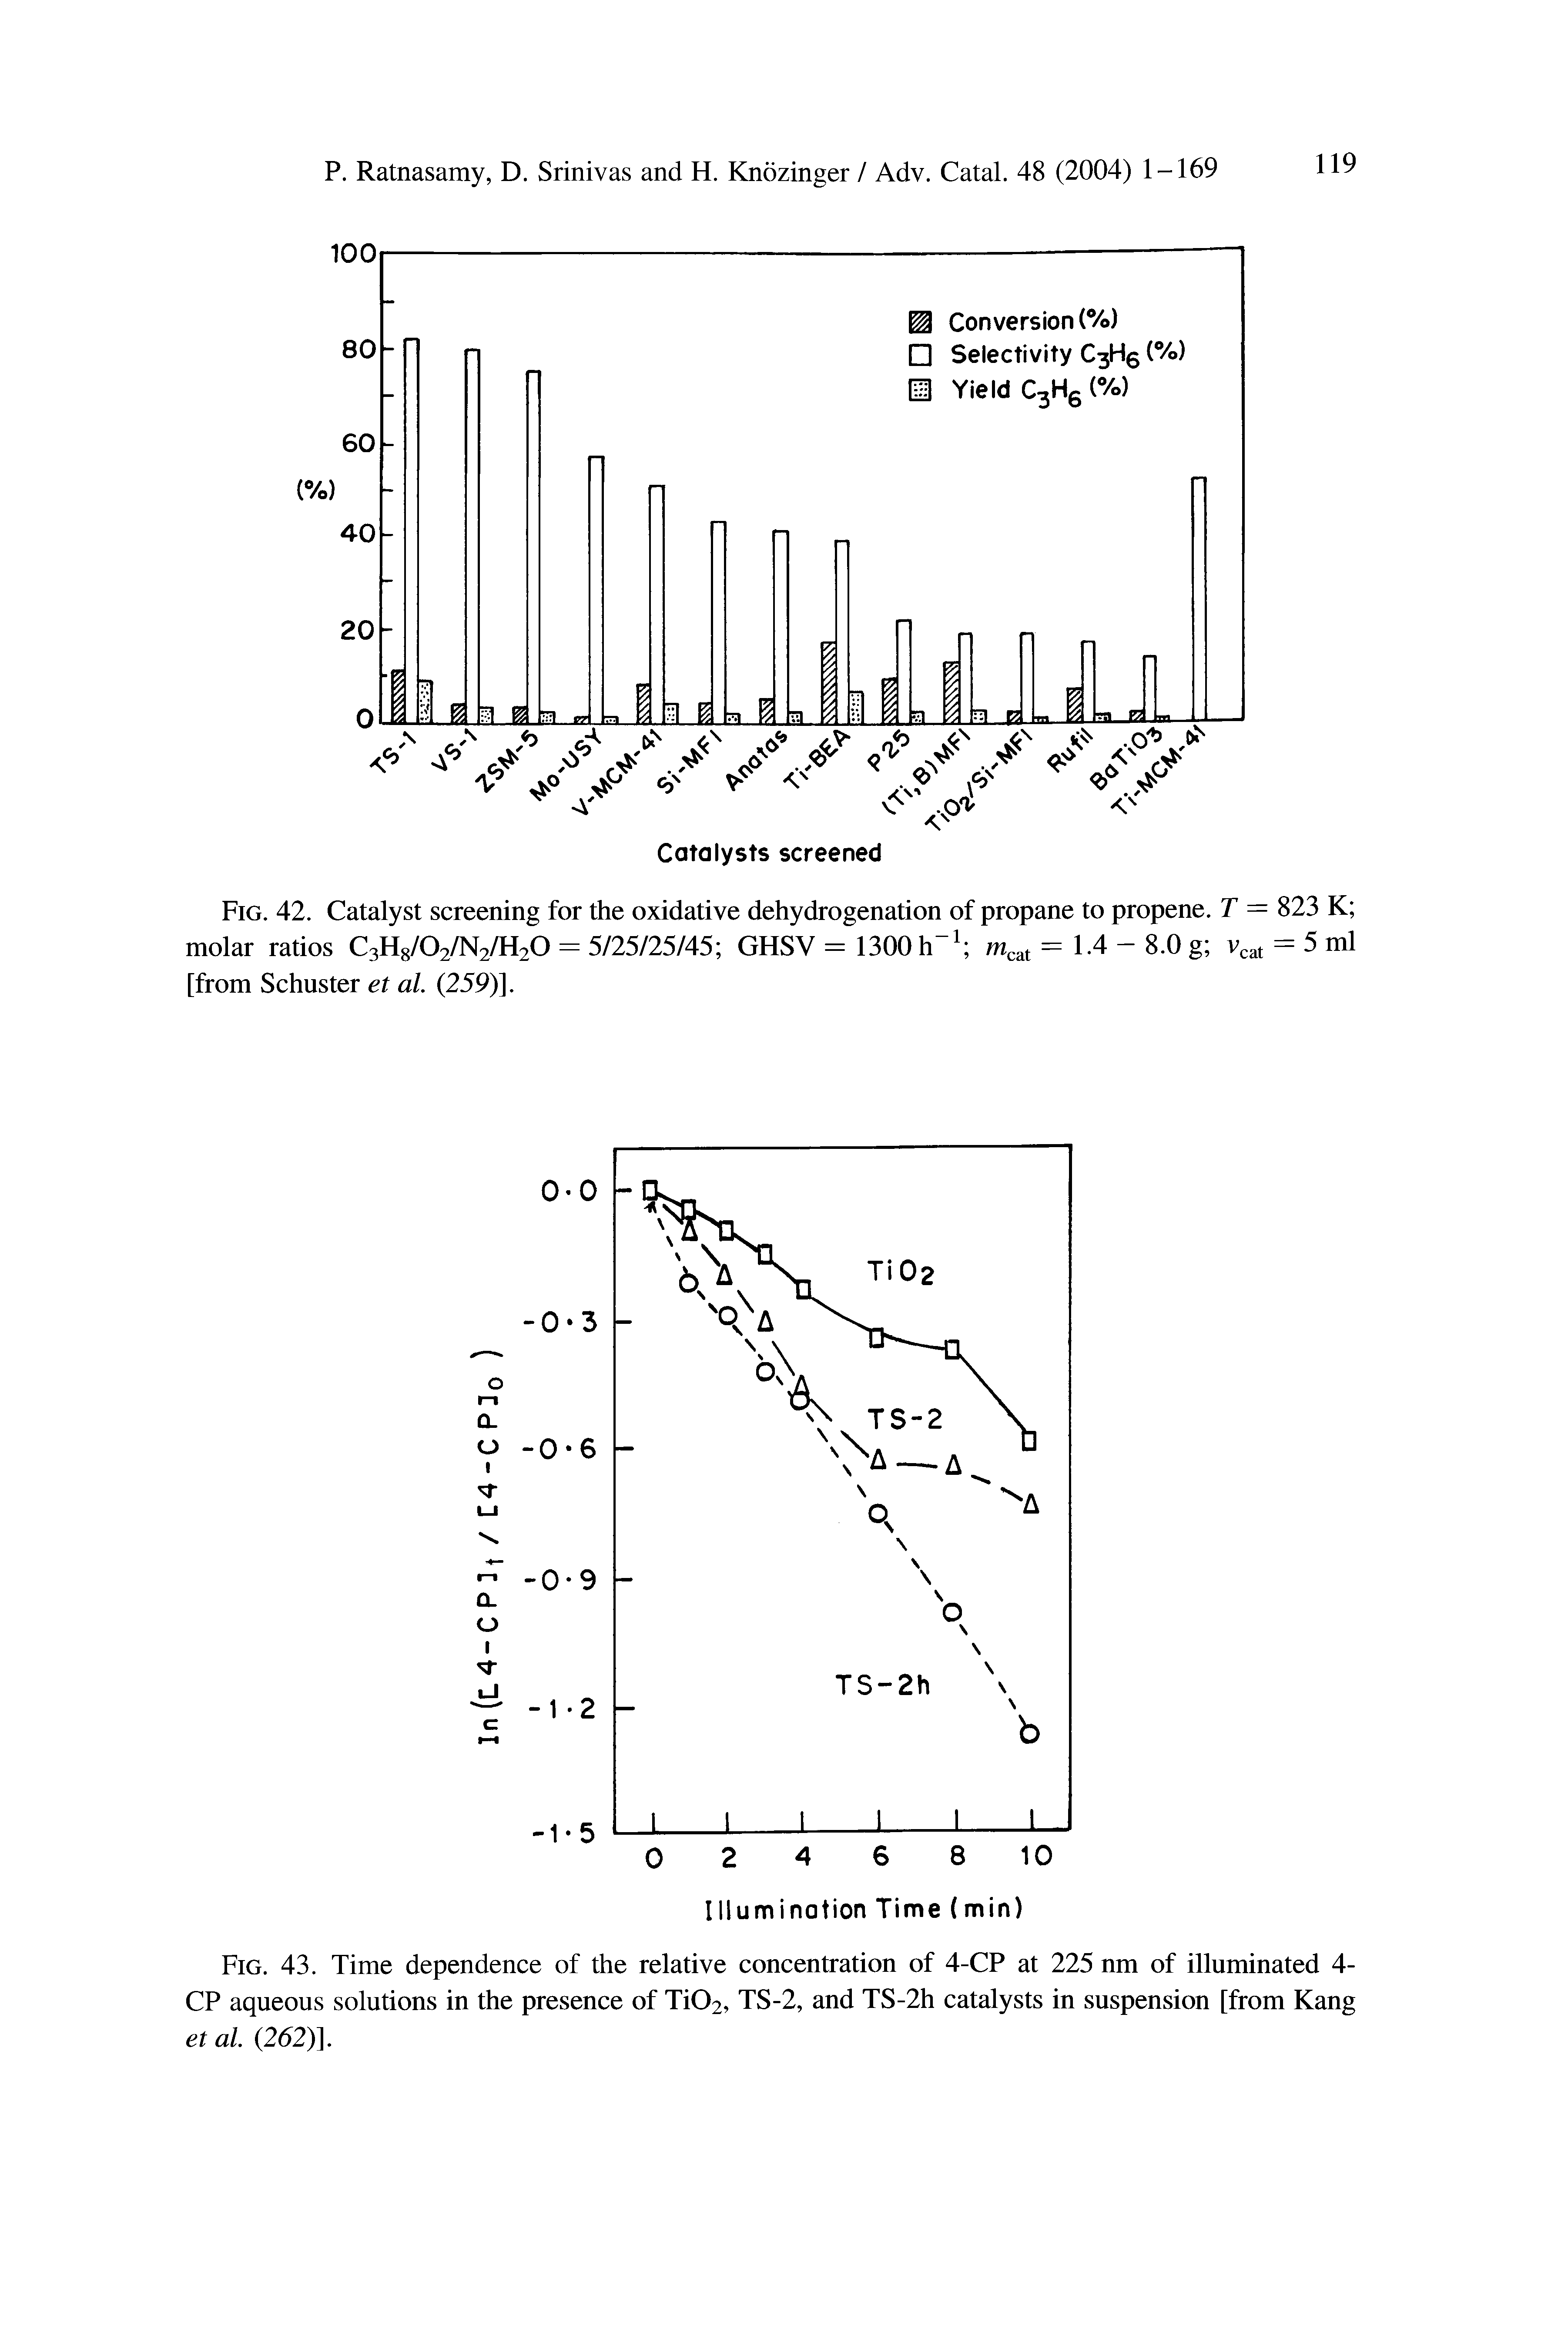 Fig. 42. Catalyst screening for the oxidative dehydrogenation of propane to propene. T = 823 K molar ratios C3H8/02/N2/H20 = 5/25/25/45 GHSV = 1300 h-1 mcat = 1.4 - 8.0 g vcat = 5 ml [from Schuster et al. (259)].